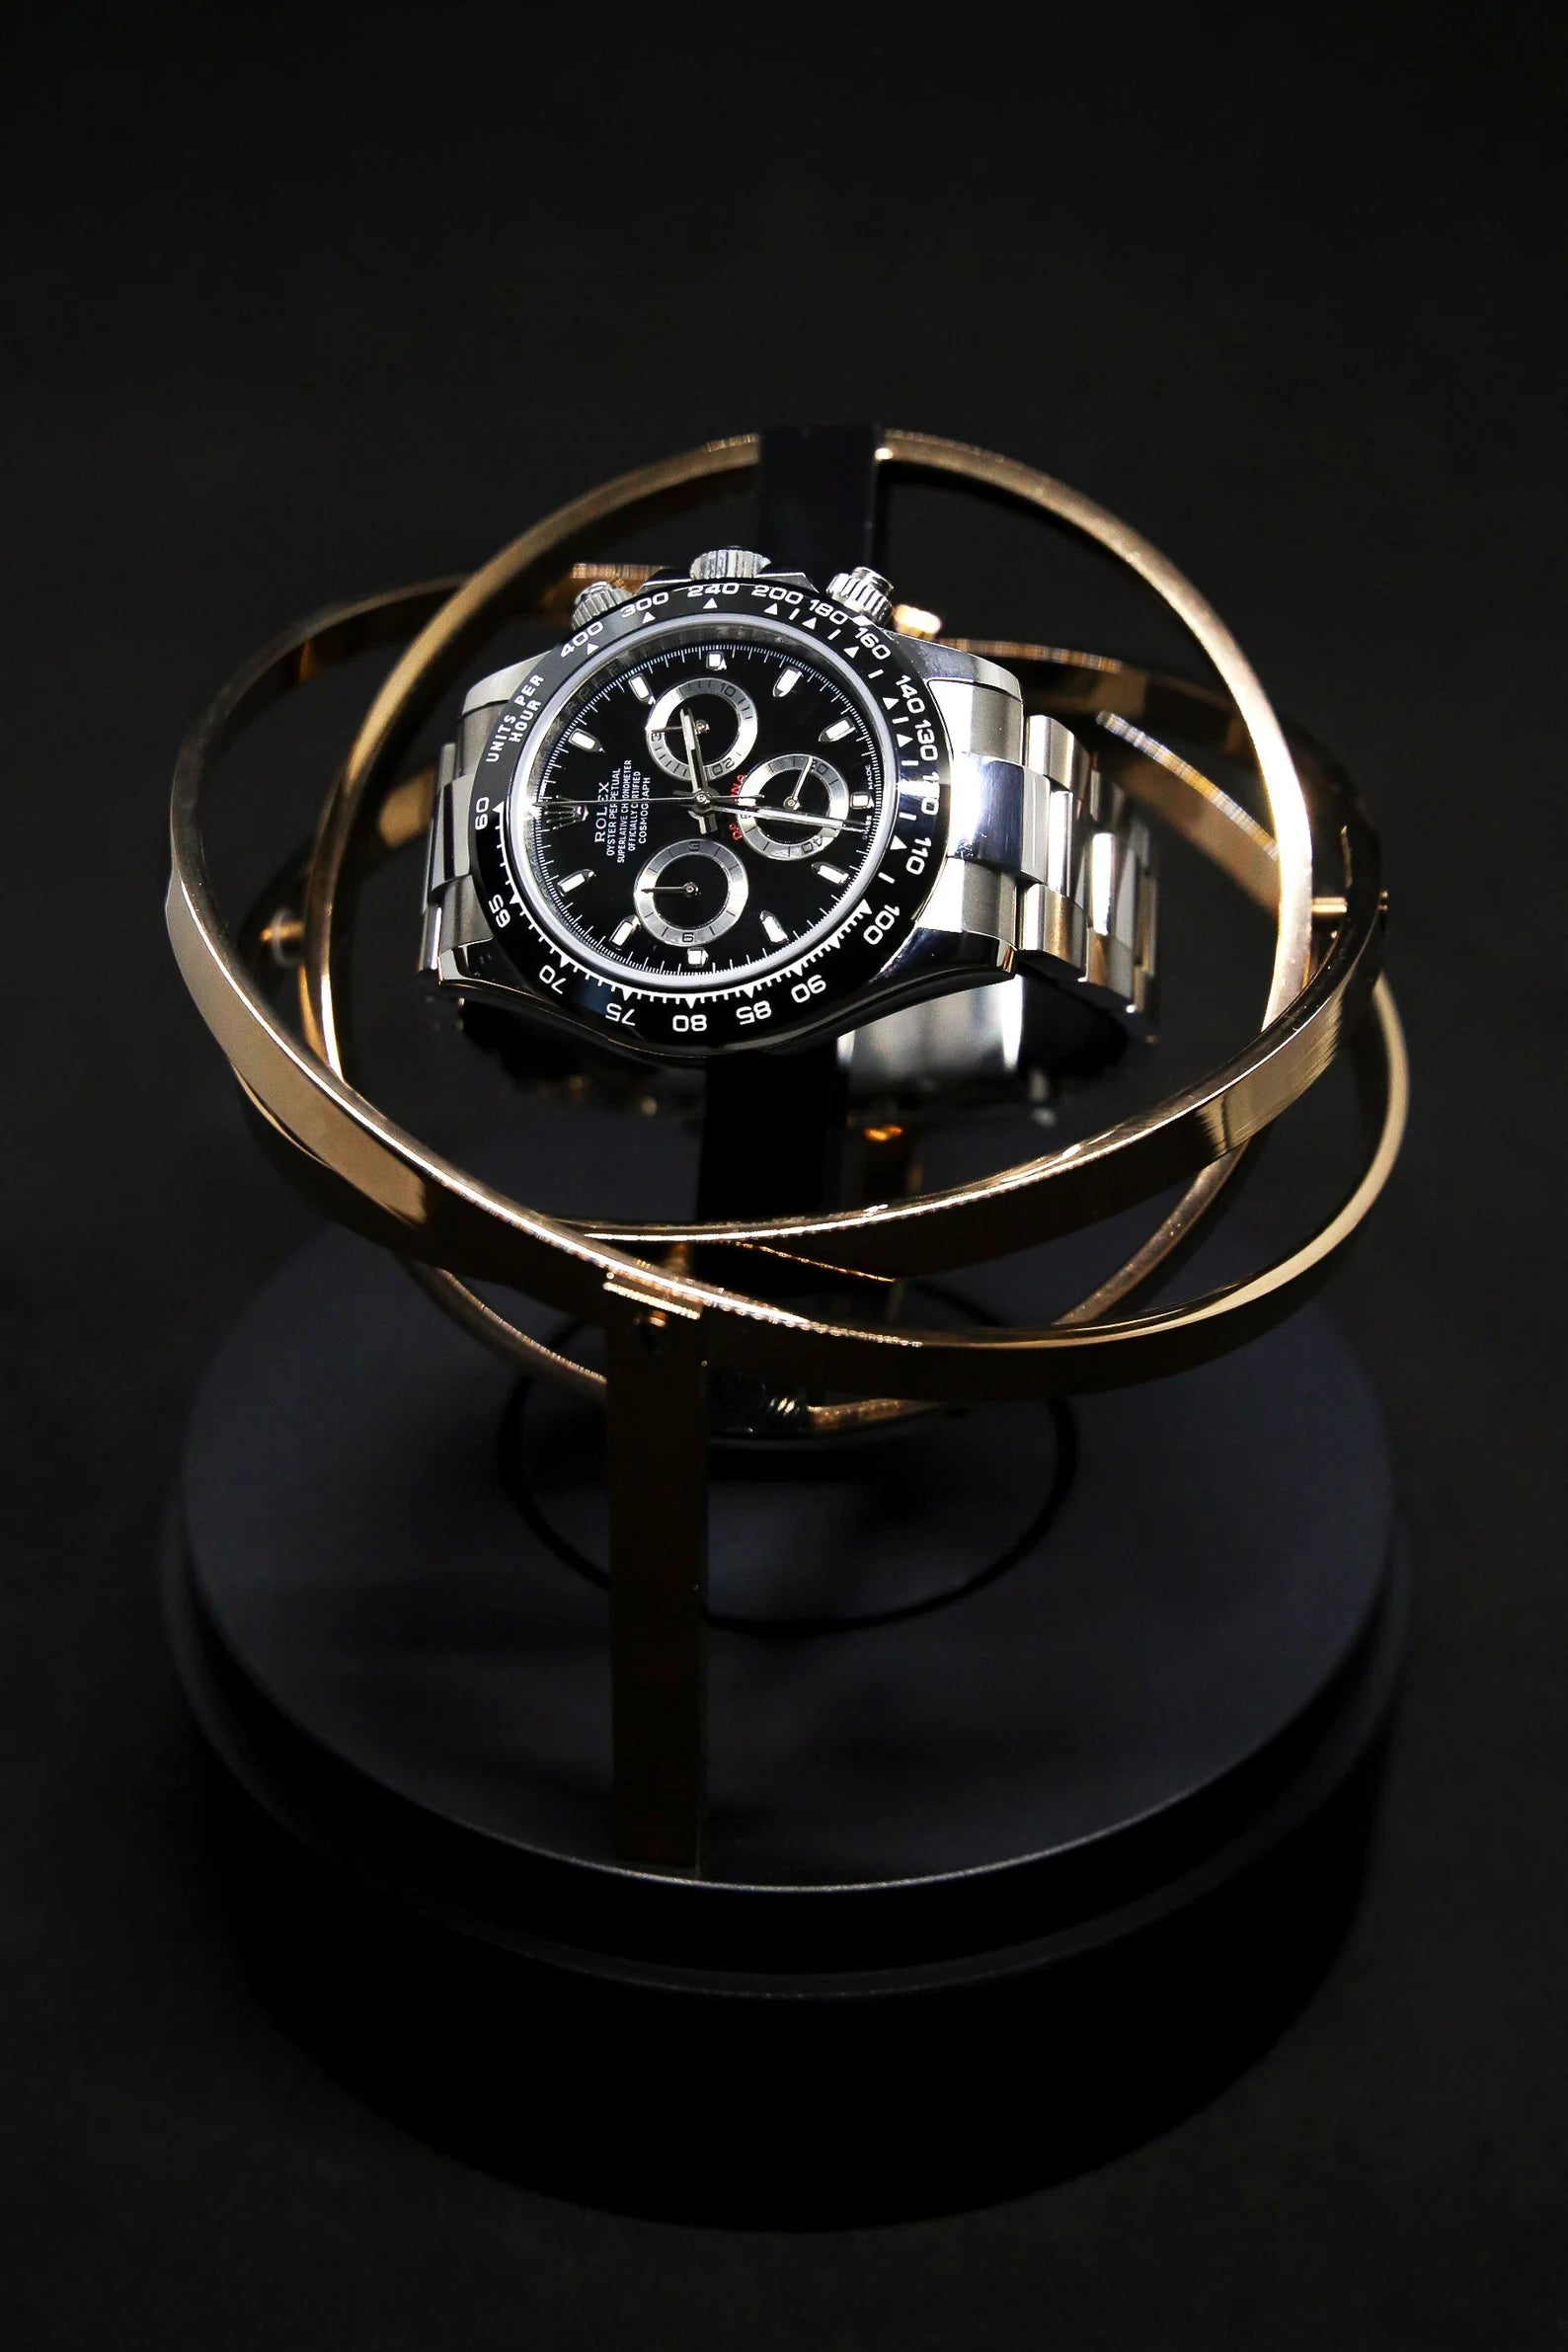 Watch Winder - Astronomia X1 Gold Edition - Gyro Automatic Watch Winder